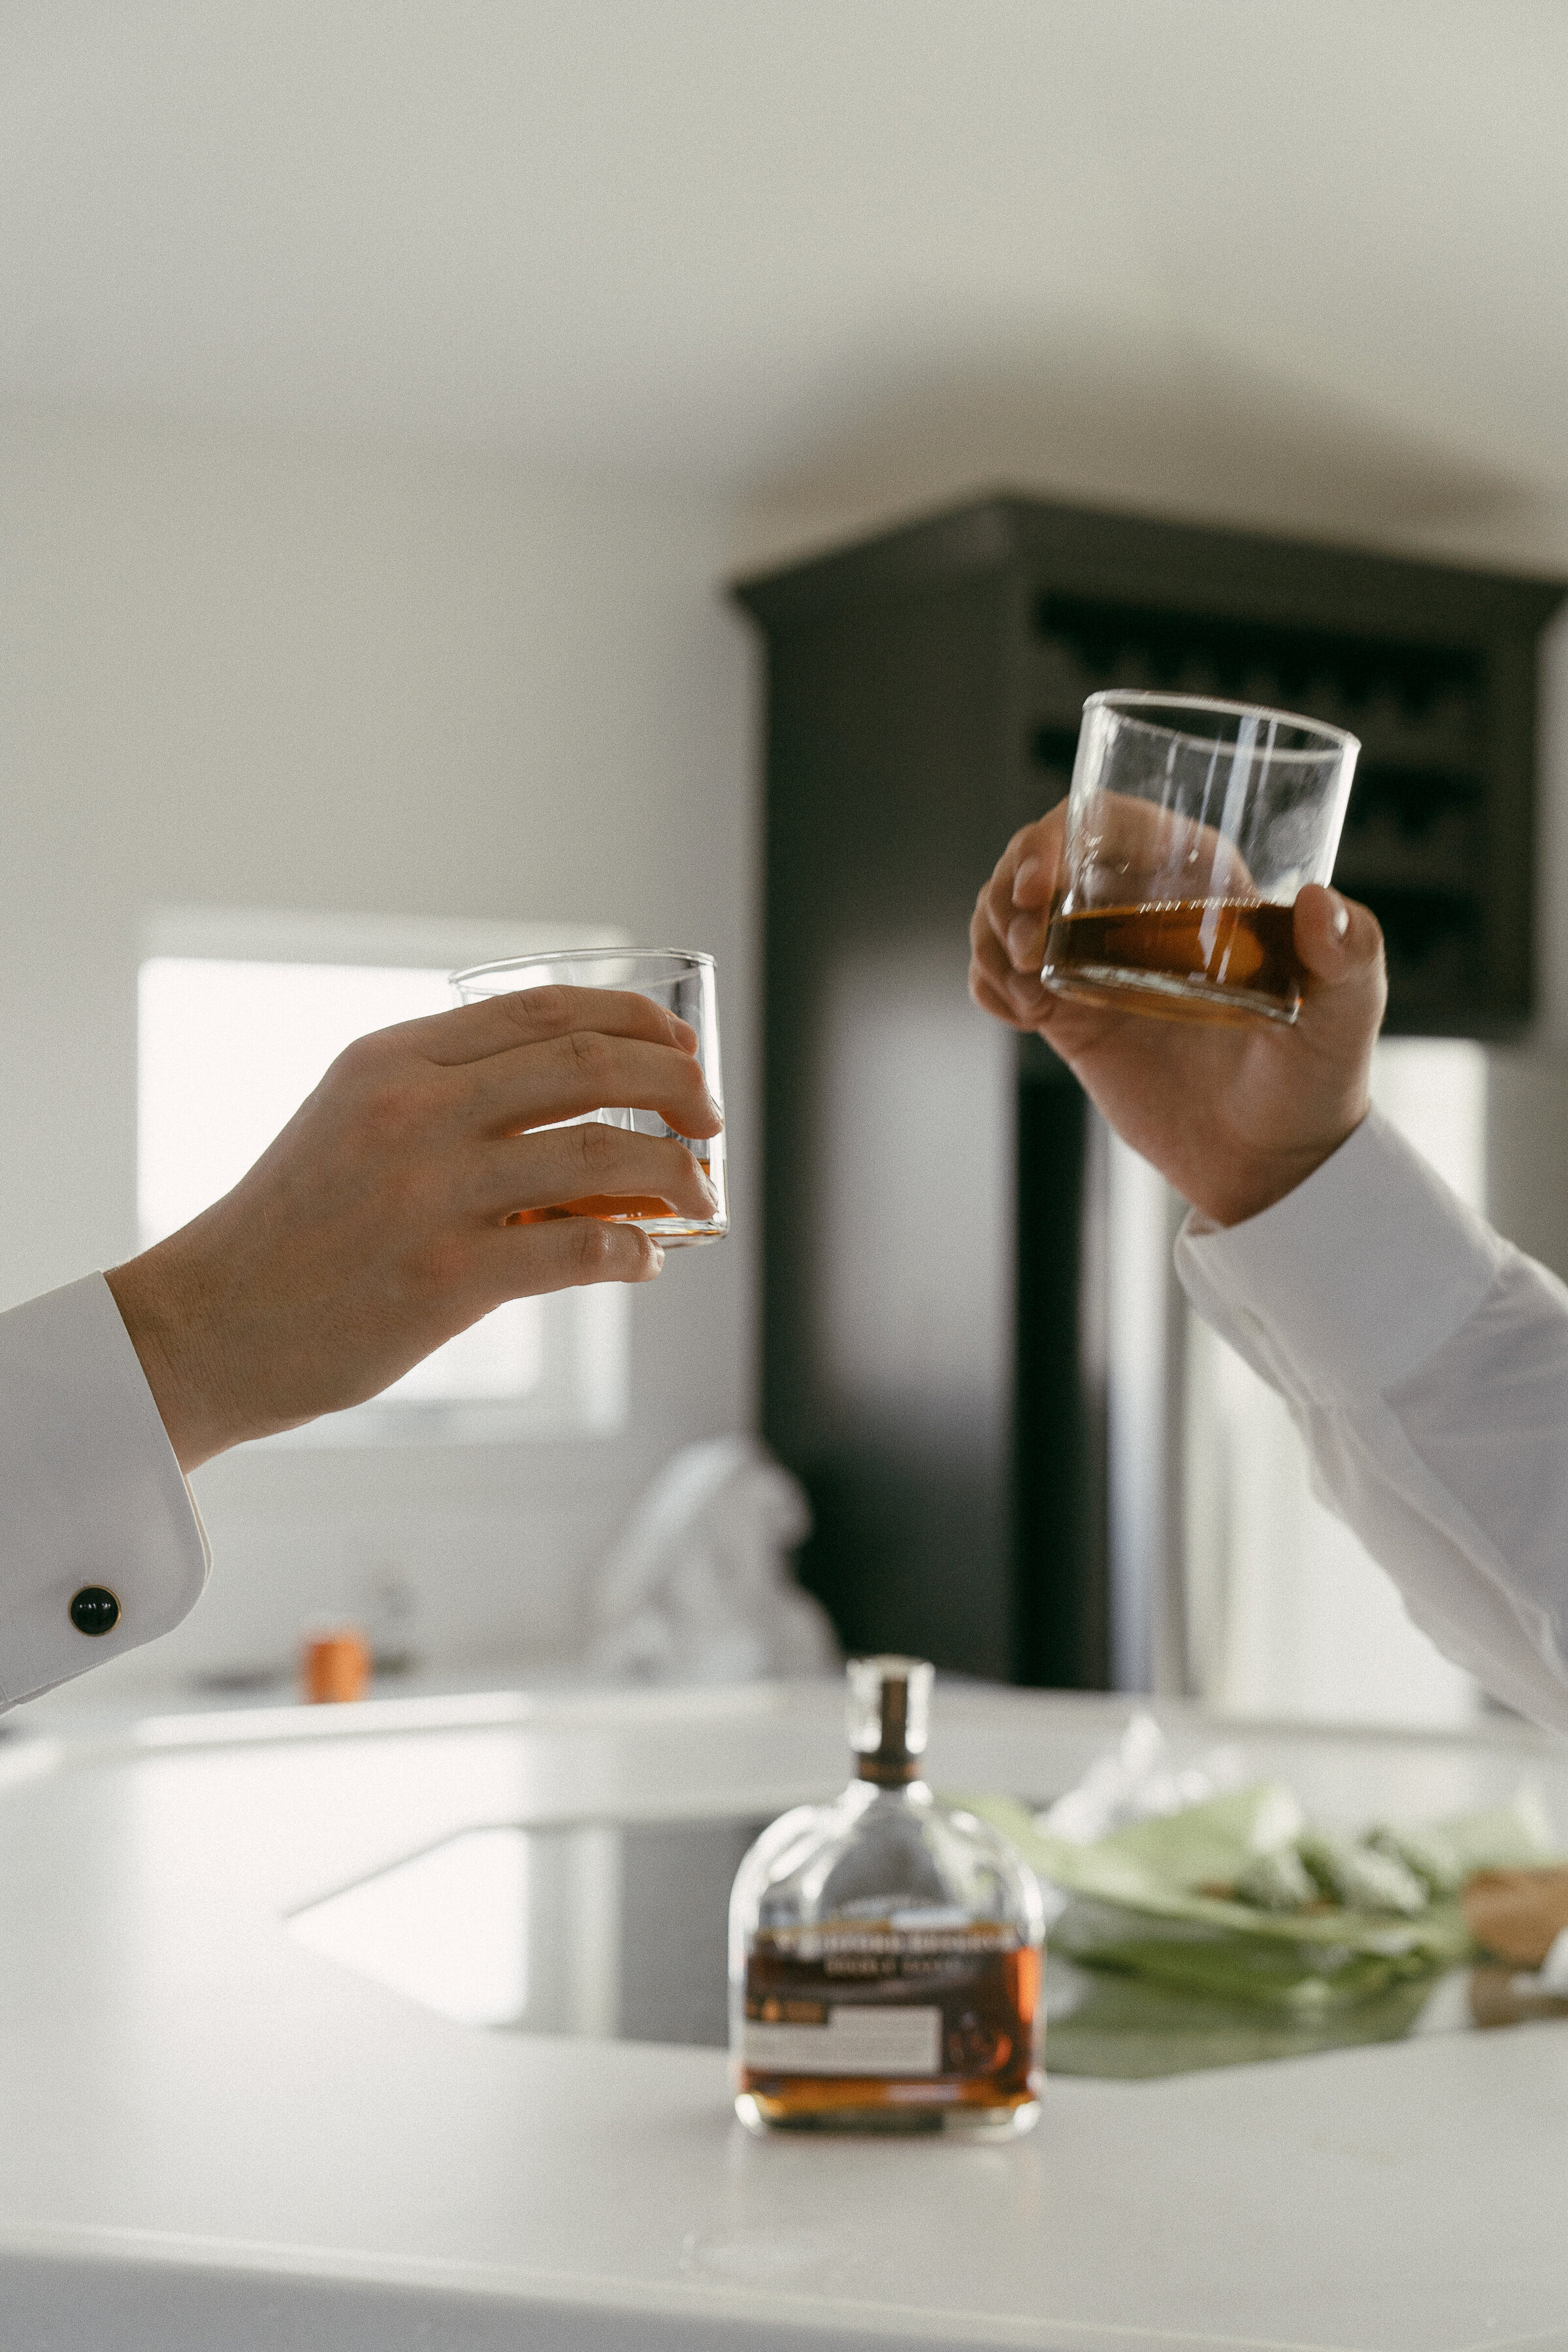 Two hands toasting with whiskey glasses, wedding ring visible.